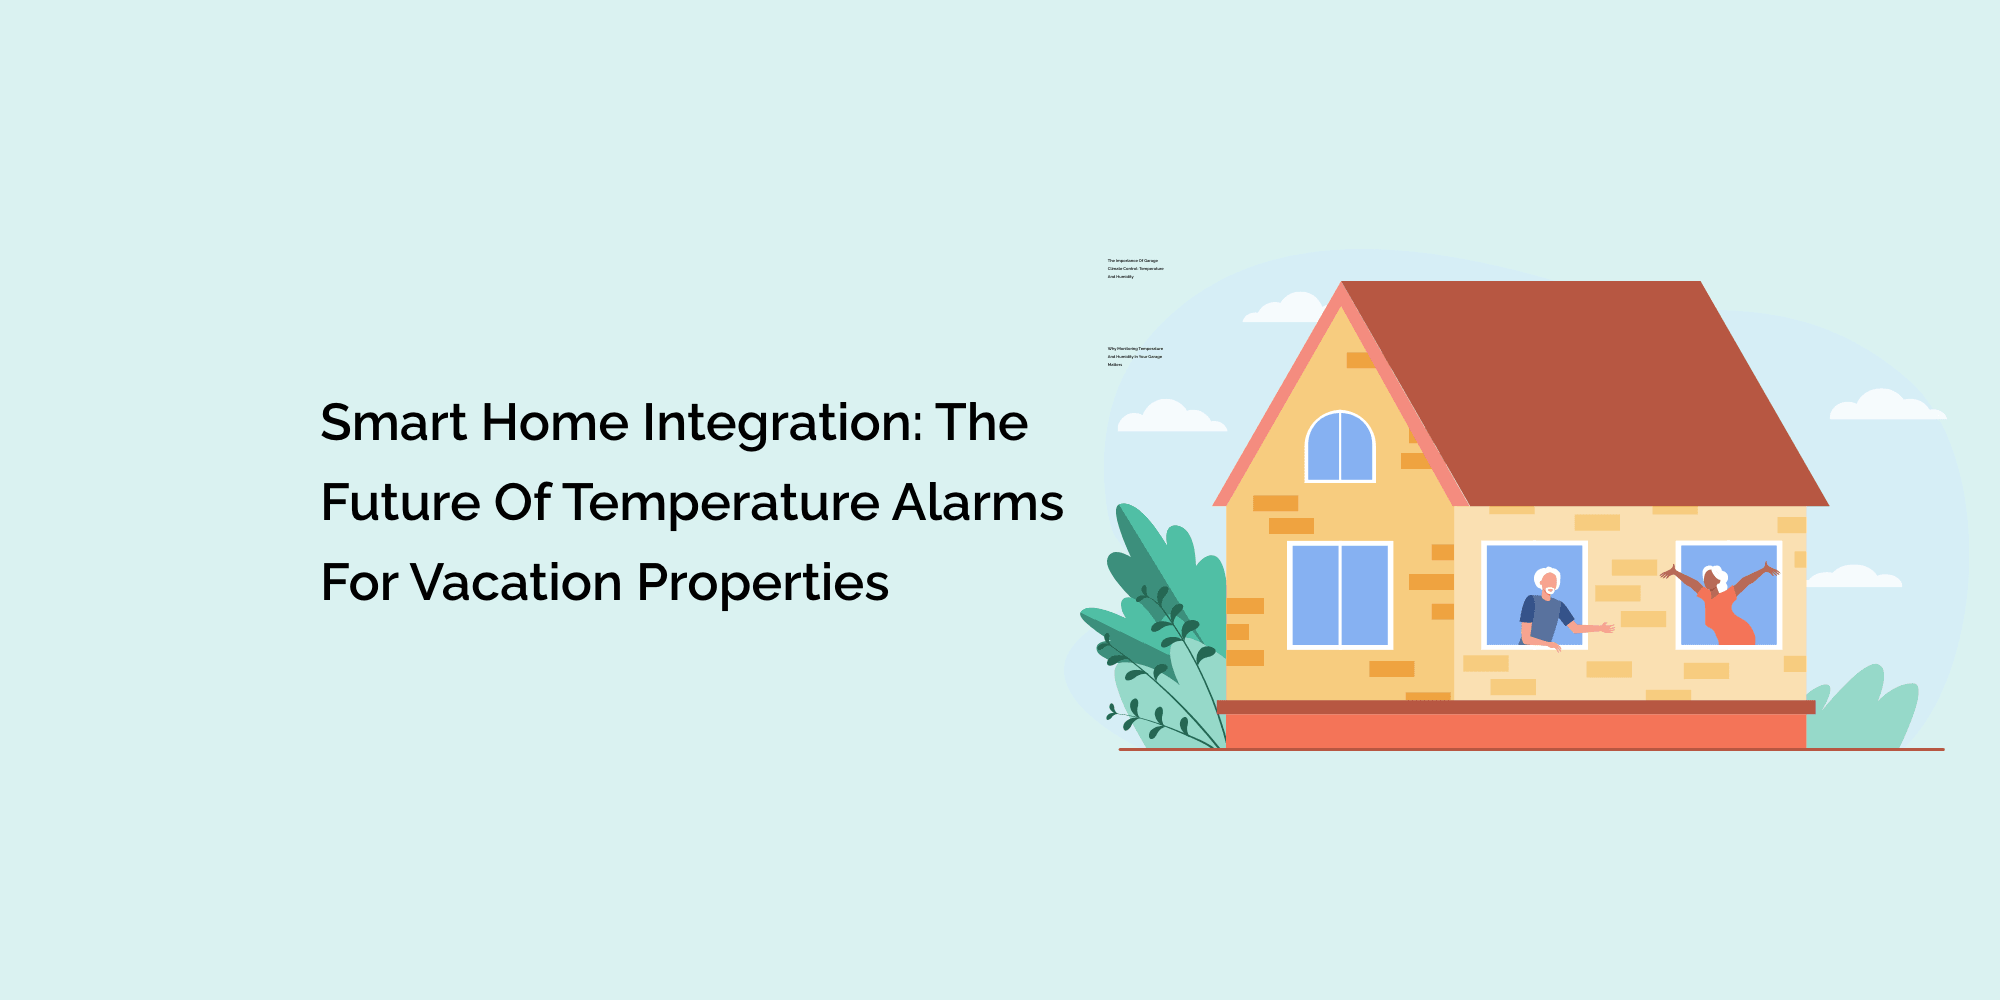 Smart Home Integration: The Future of Temperature Alarms for Vacation Properties